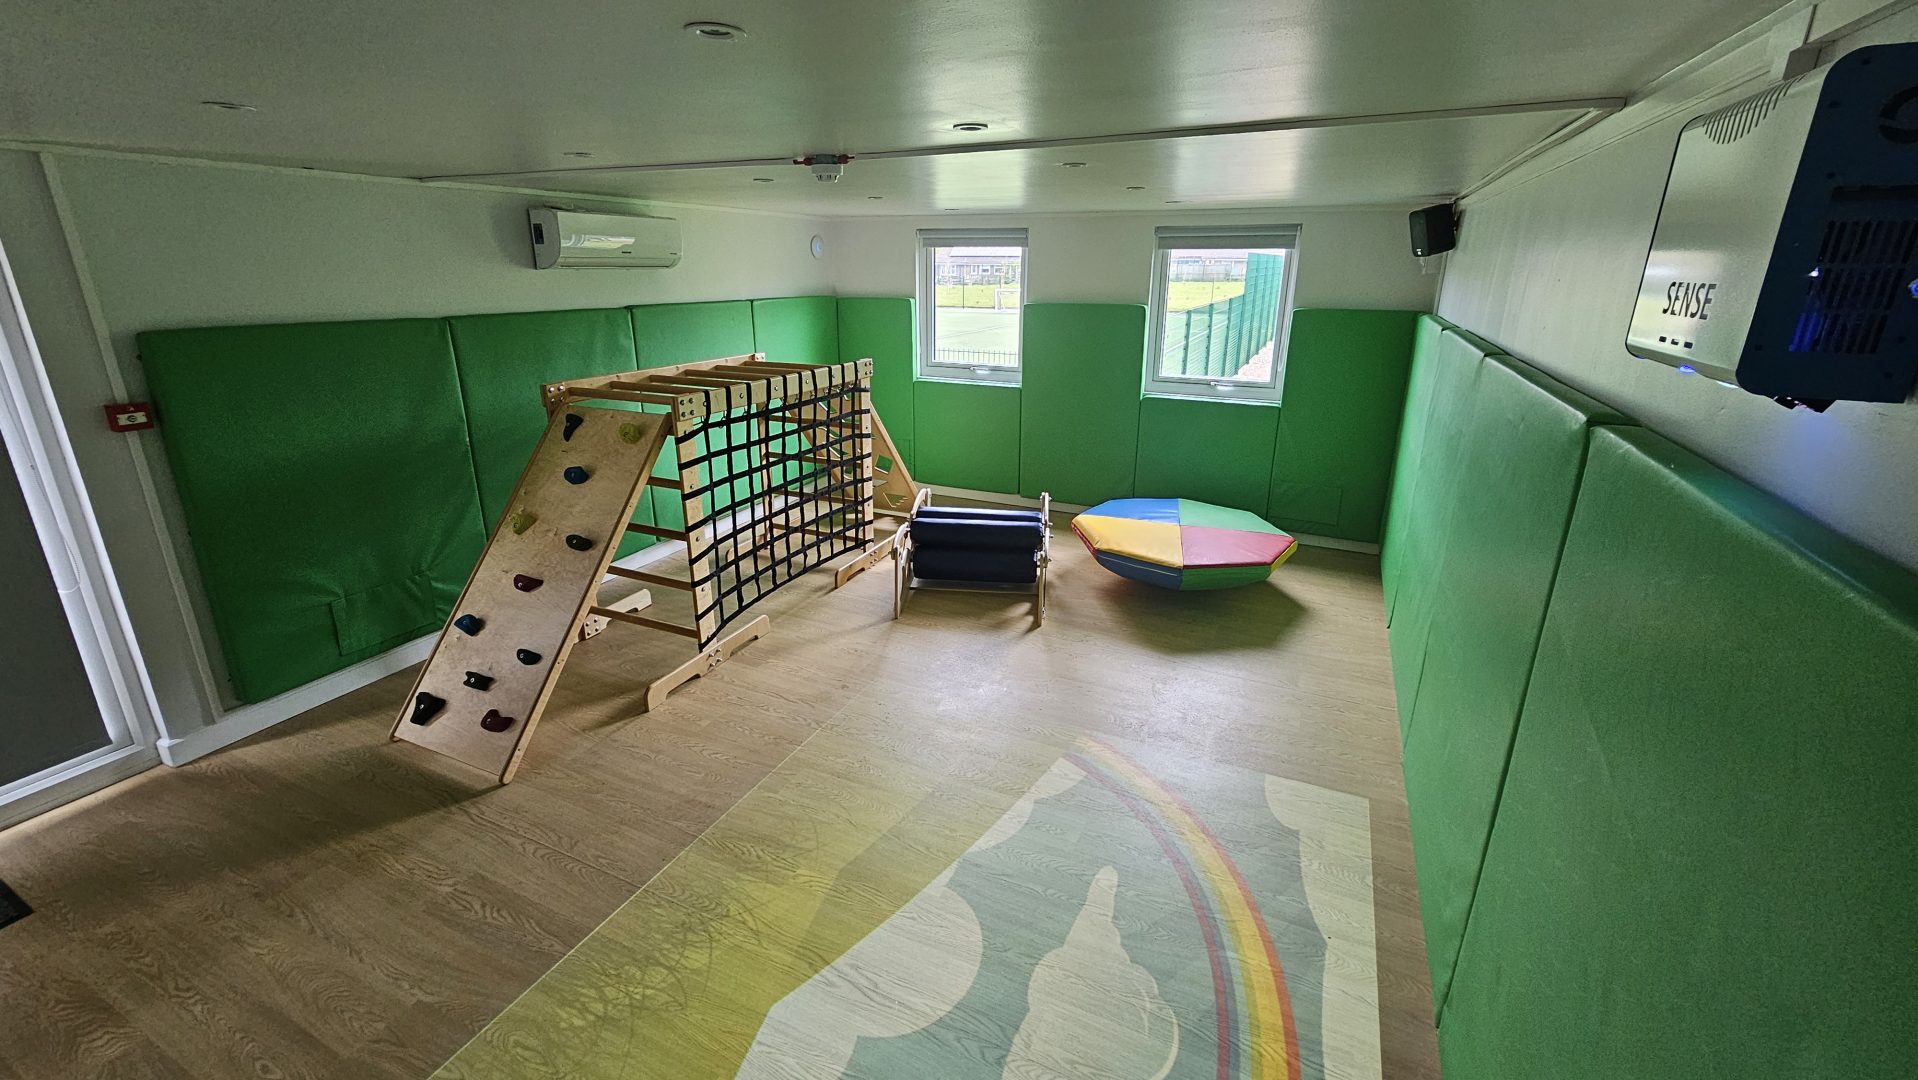 The image shows an example of a Sensory integration room within a school environment. The Sensory Integration room features a climbing system to promote strength, balance and coordination while providing a fun and engaging sensory activity. The Sensory Integration room has green soft padding to the walls for safety. The Sensory room features a soft padded rocker roller, a sensory body roller and a SENse Air wall mounted interactive sensory floor projection.